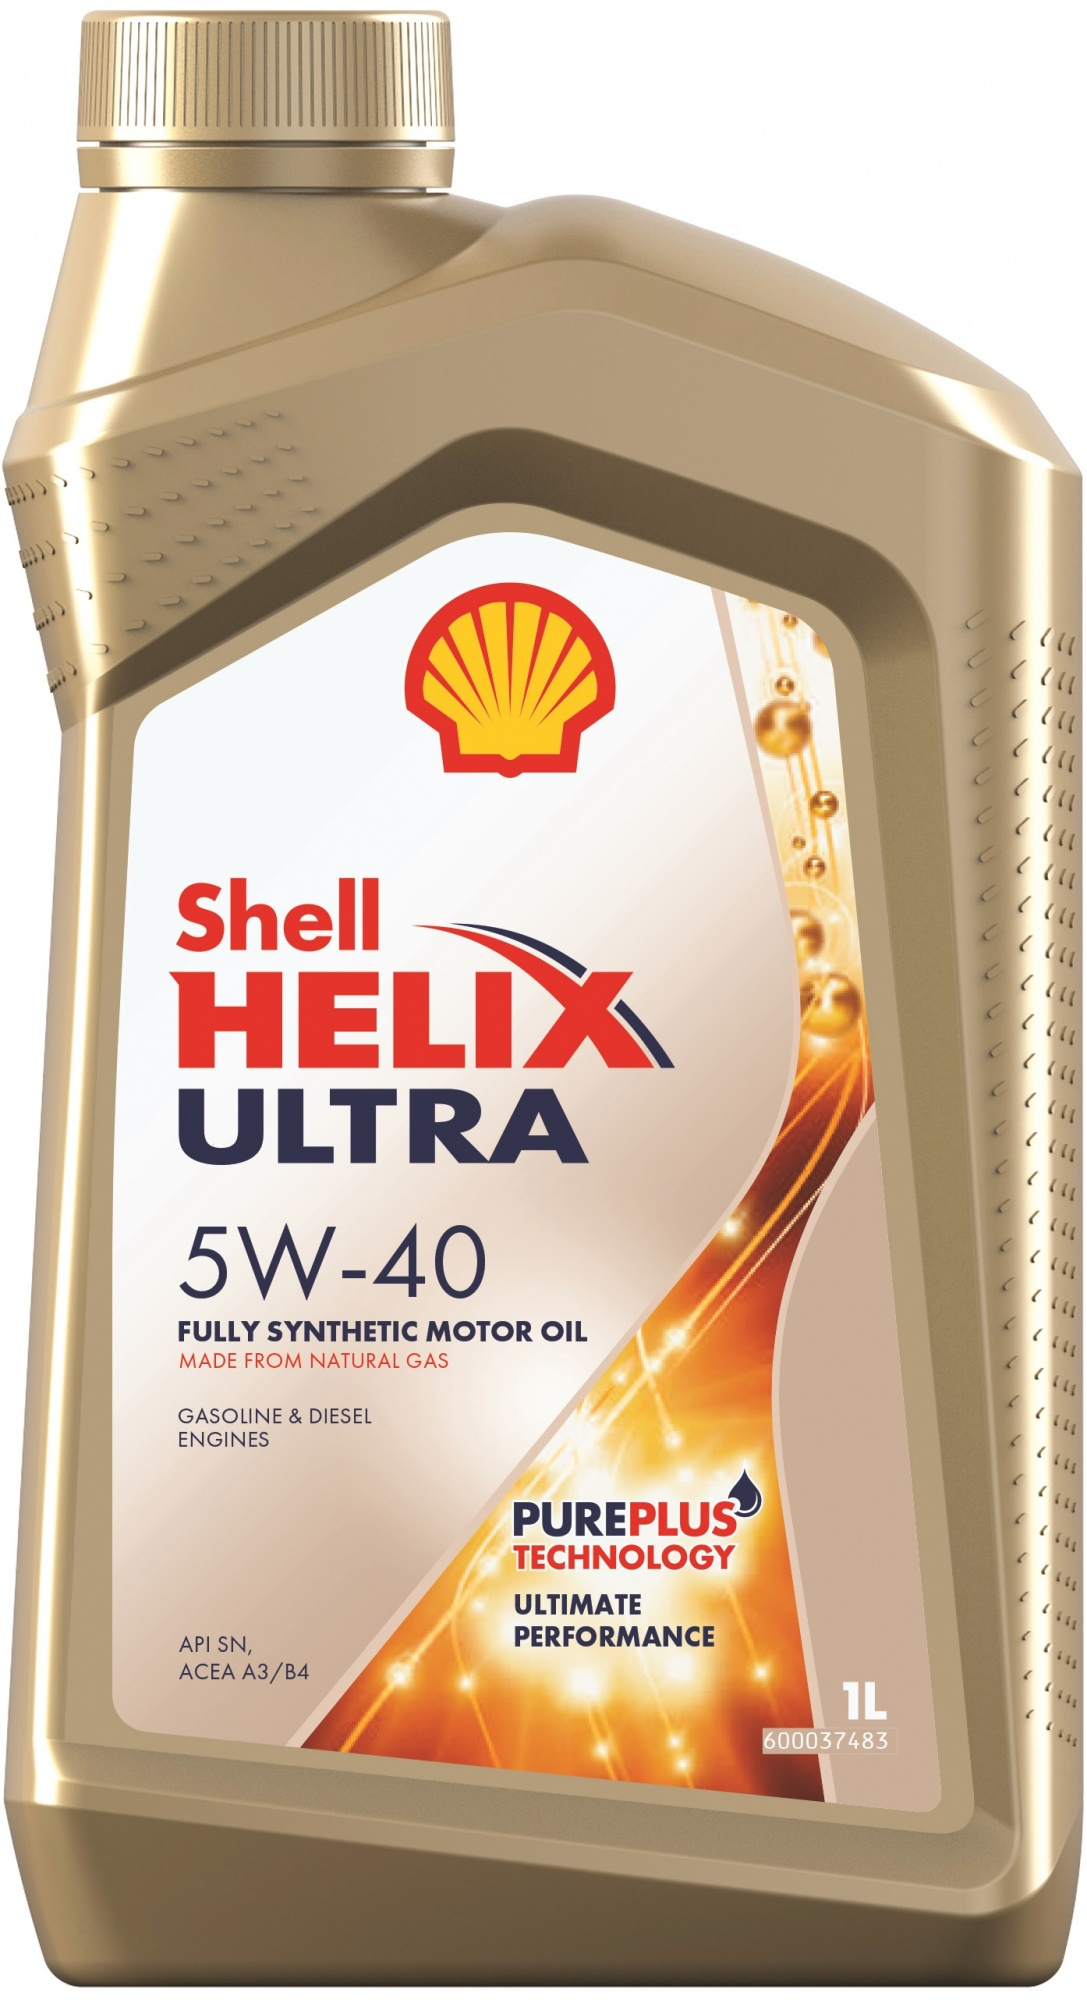 Моторное масло Shell Helix Ultra 5W-40, 550051592, 1л